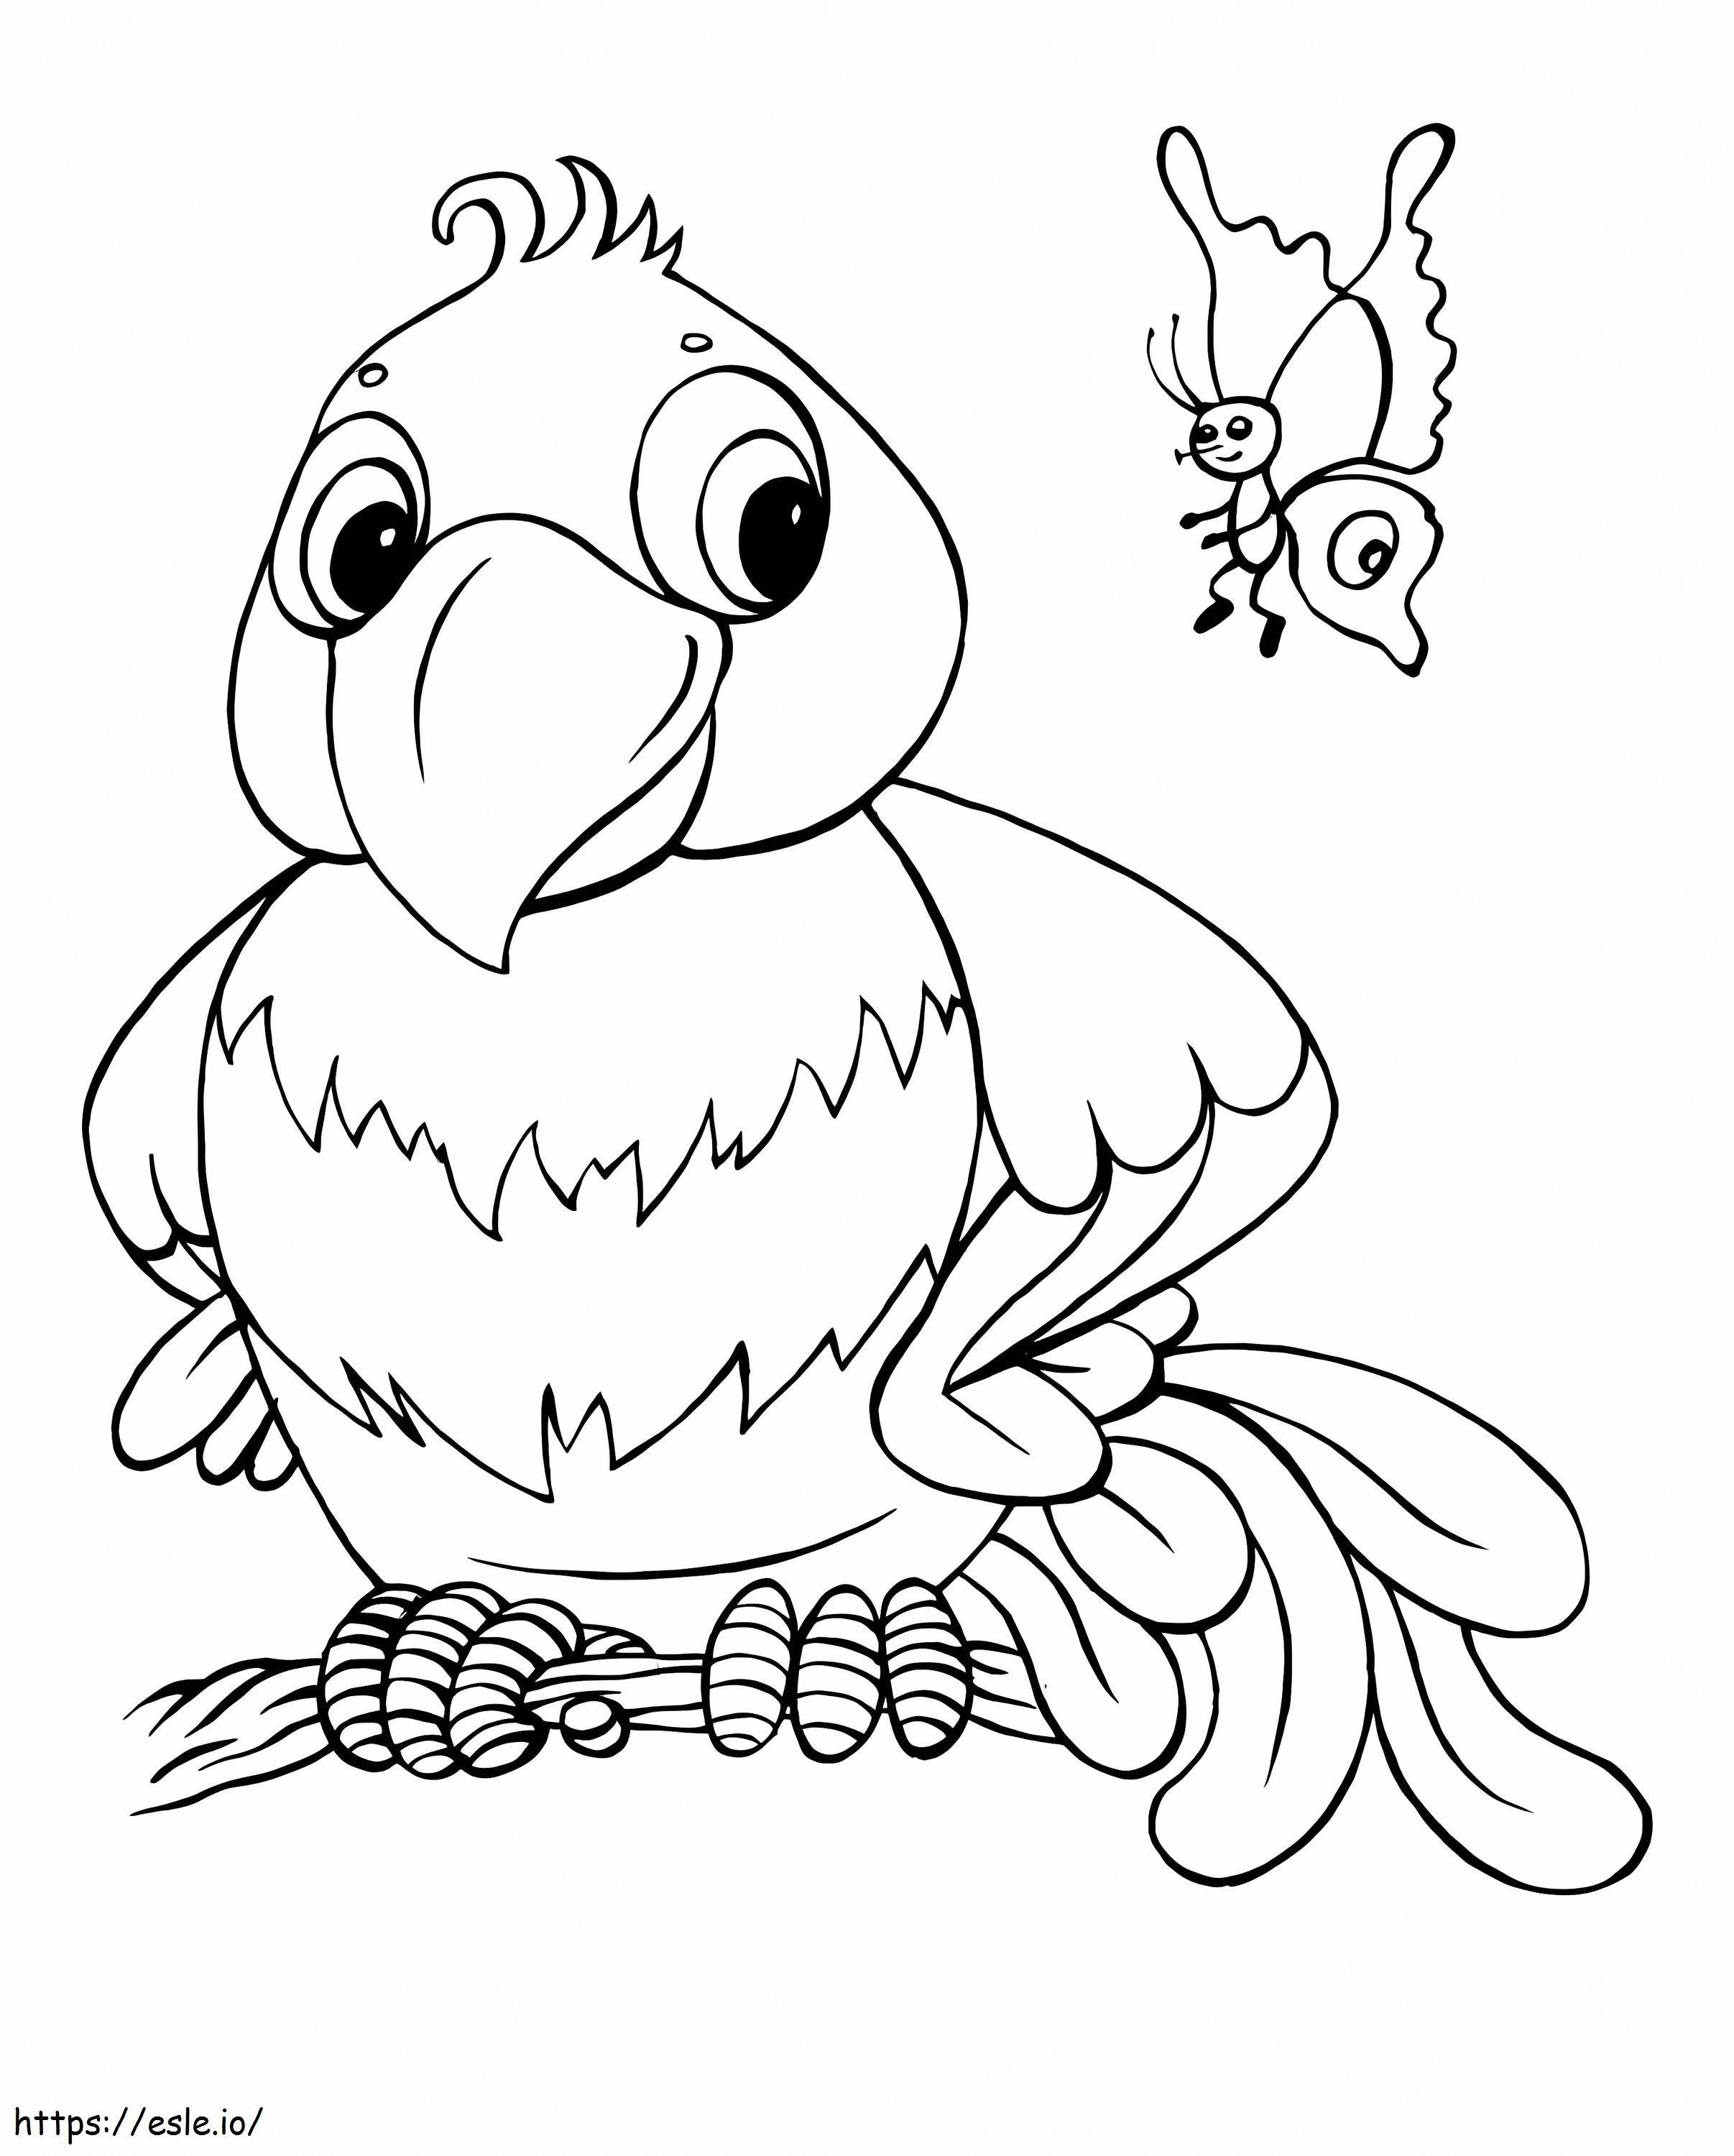 Parrot And Butterfly Cartoon coloring page